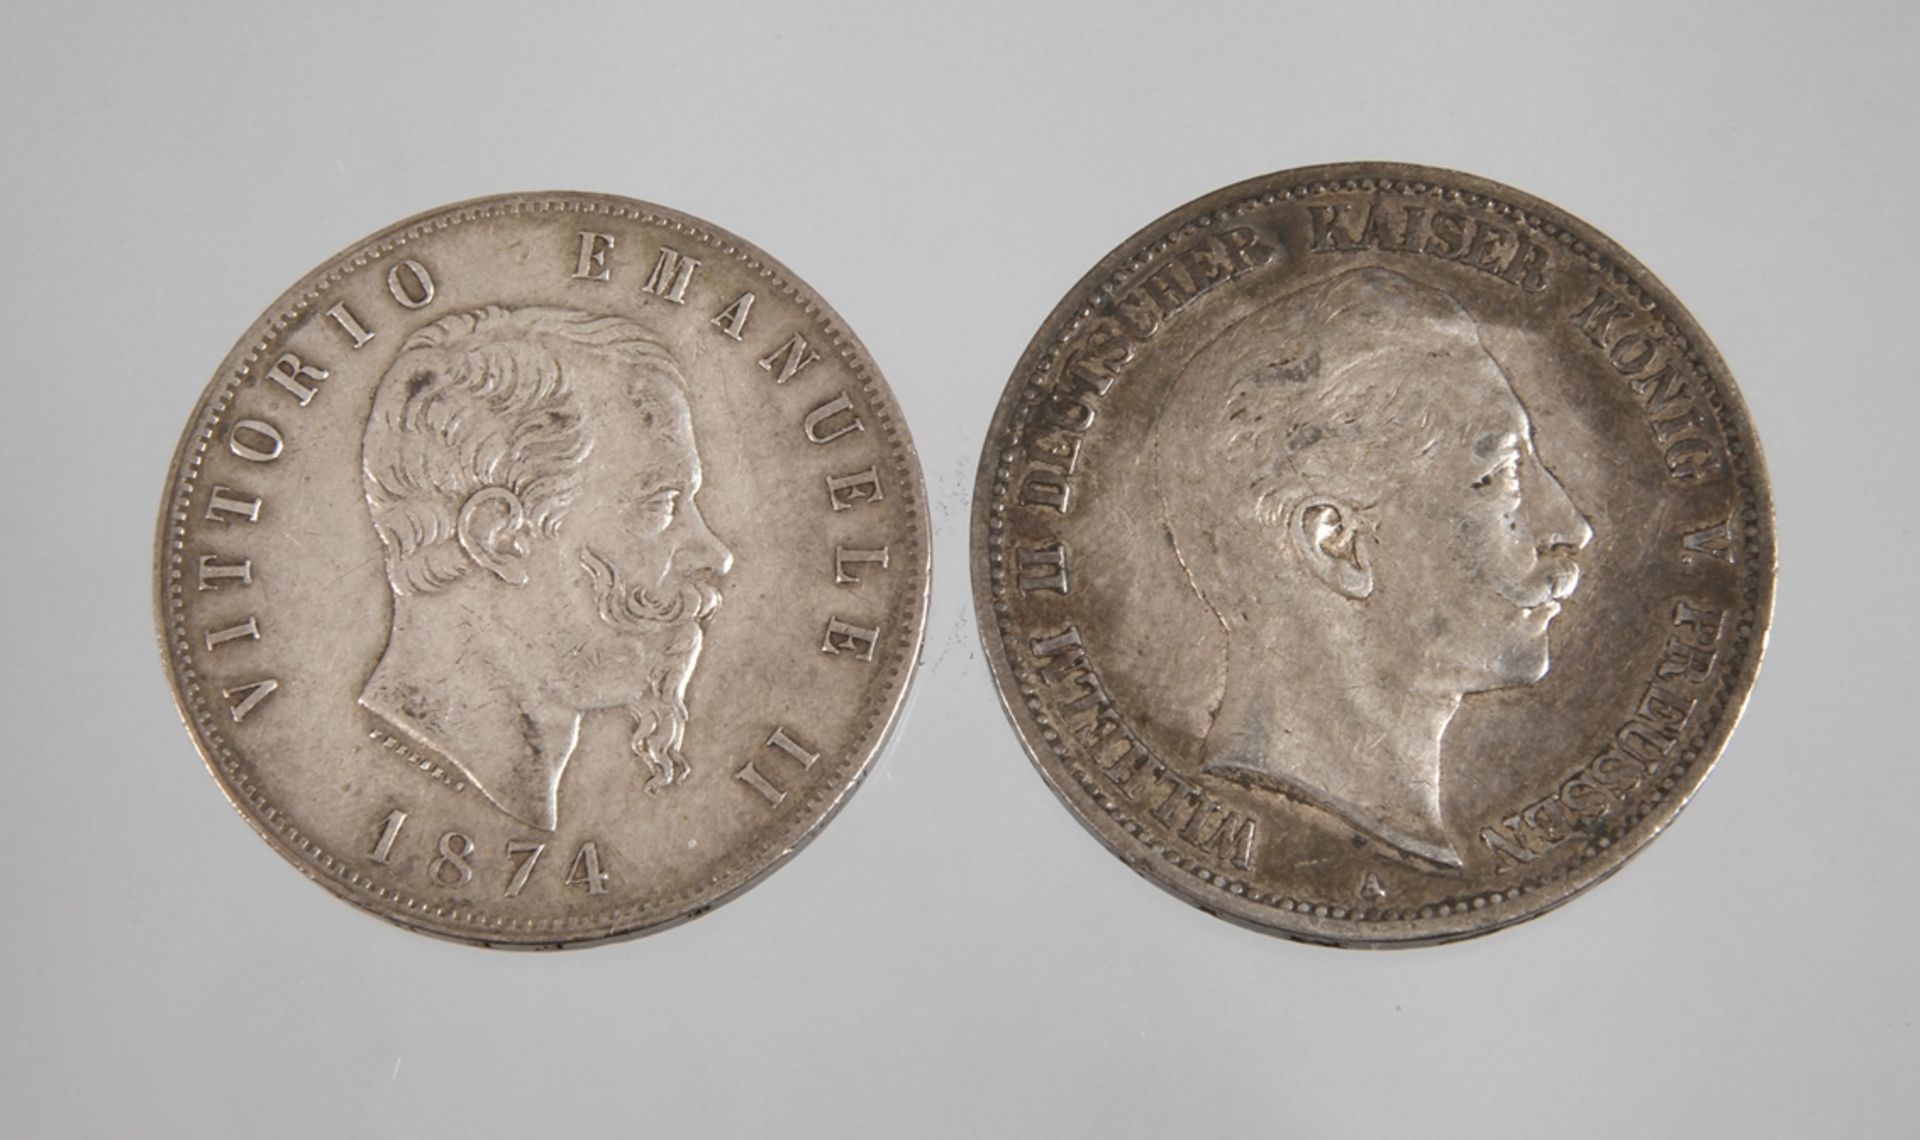 Two silver coins